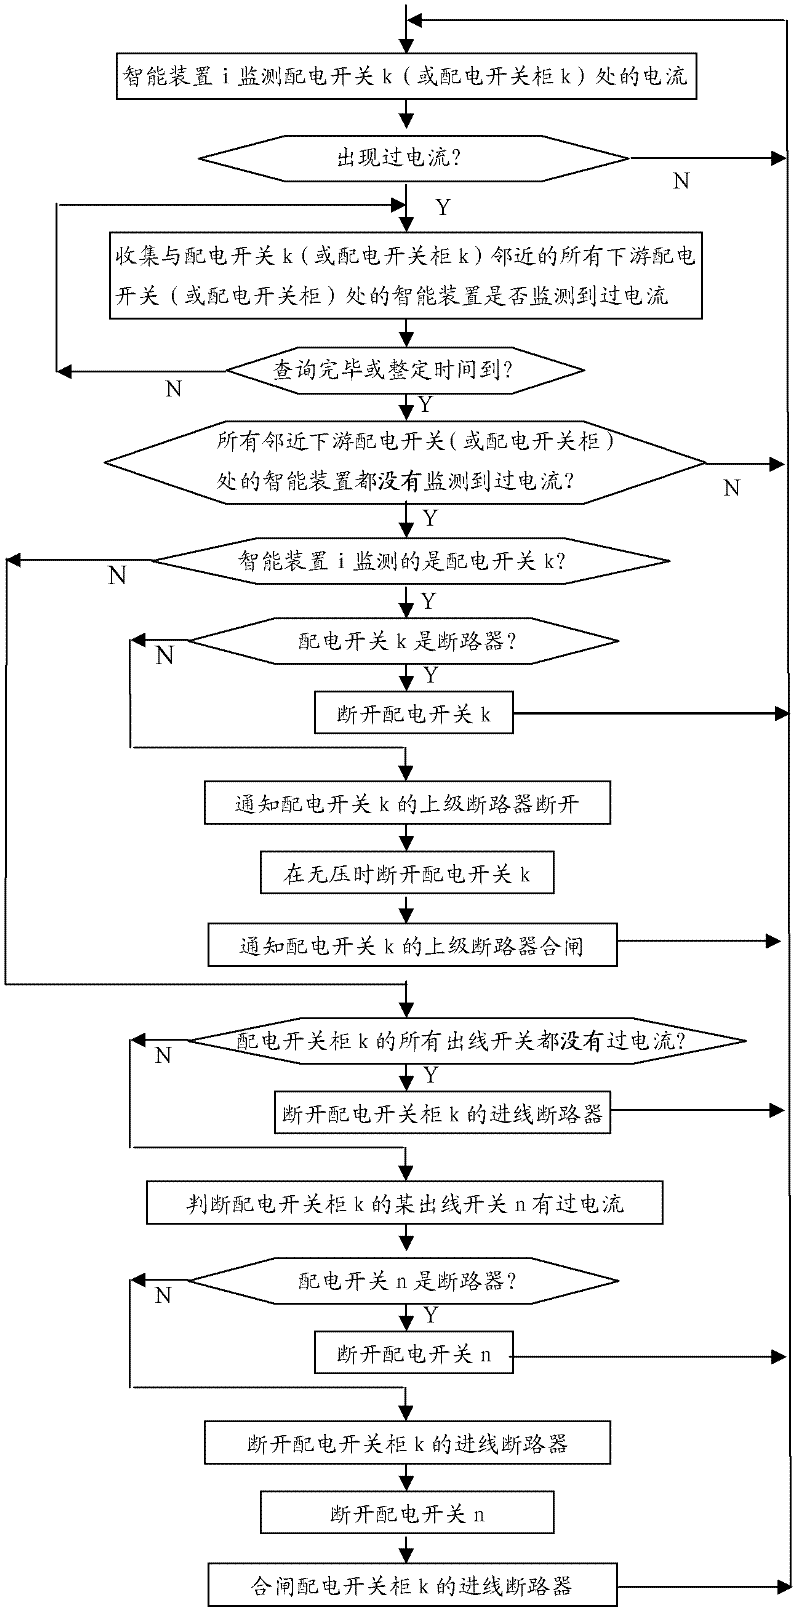 Method for distributed overcurrent protection and phase-to-phase fault isolation in distribution network